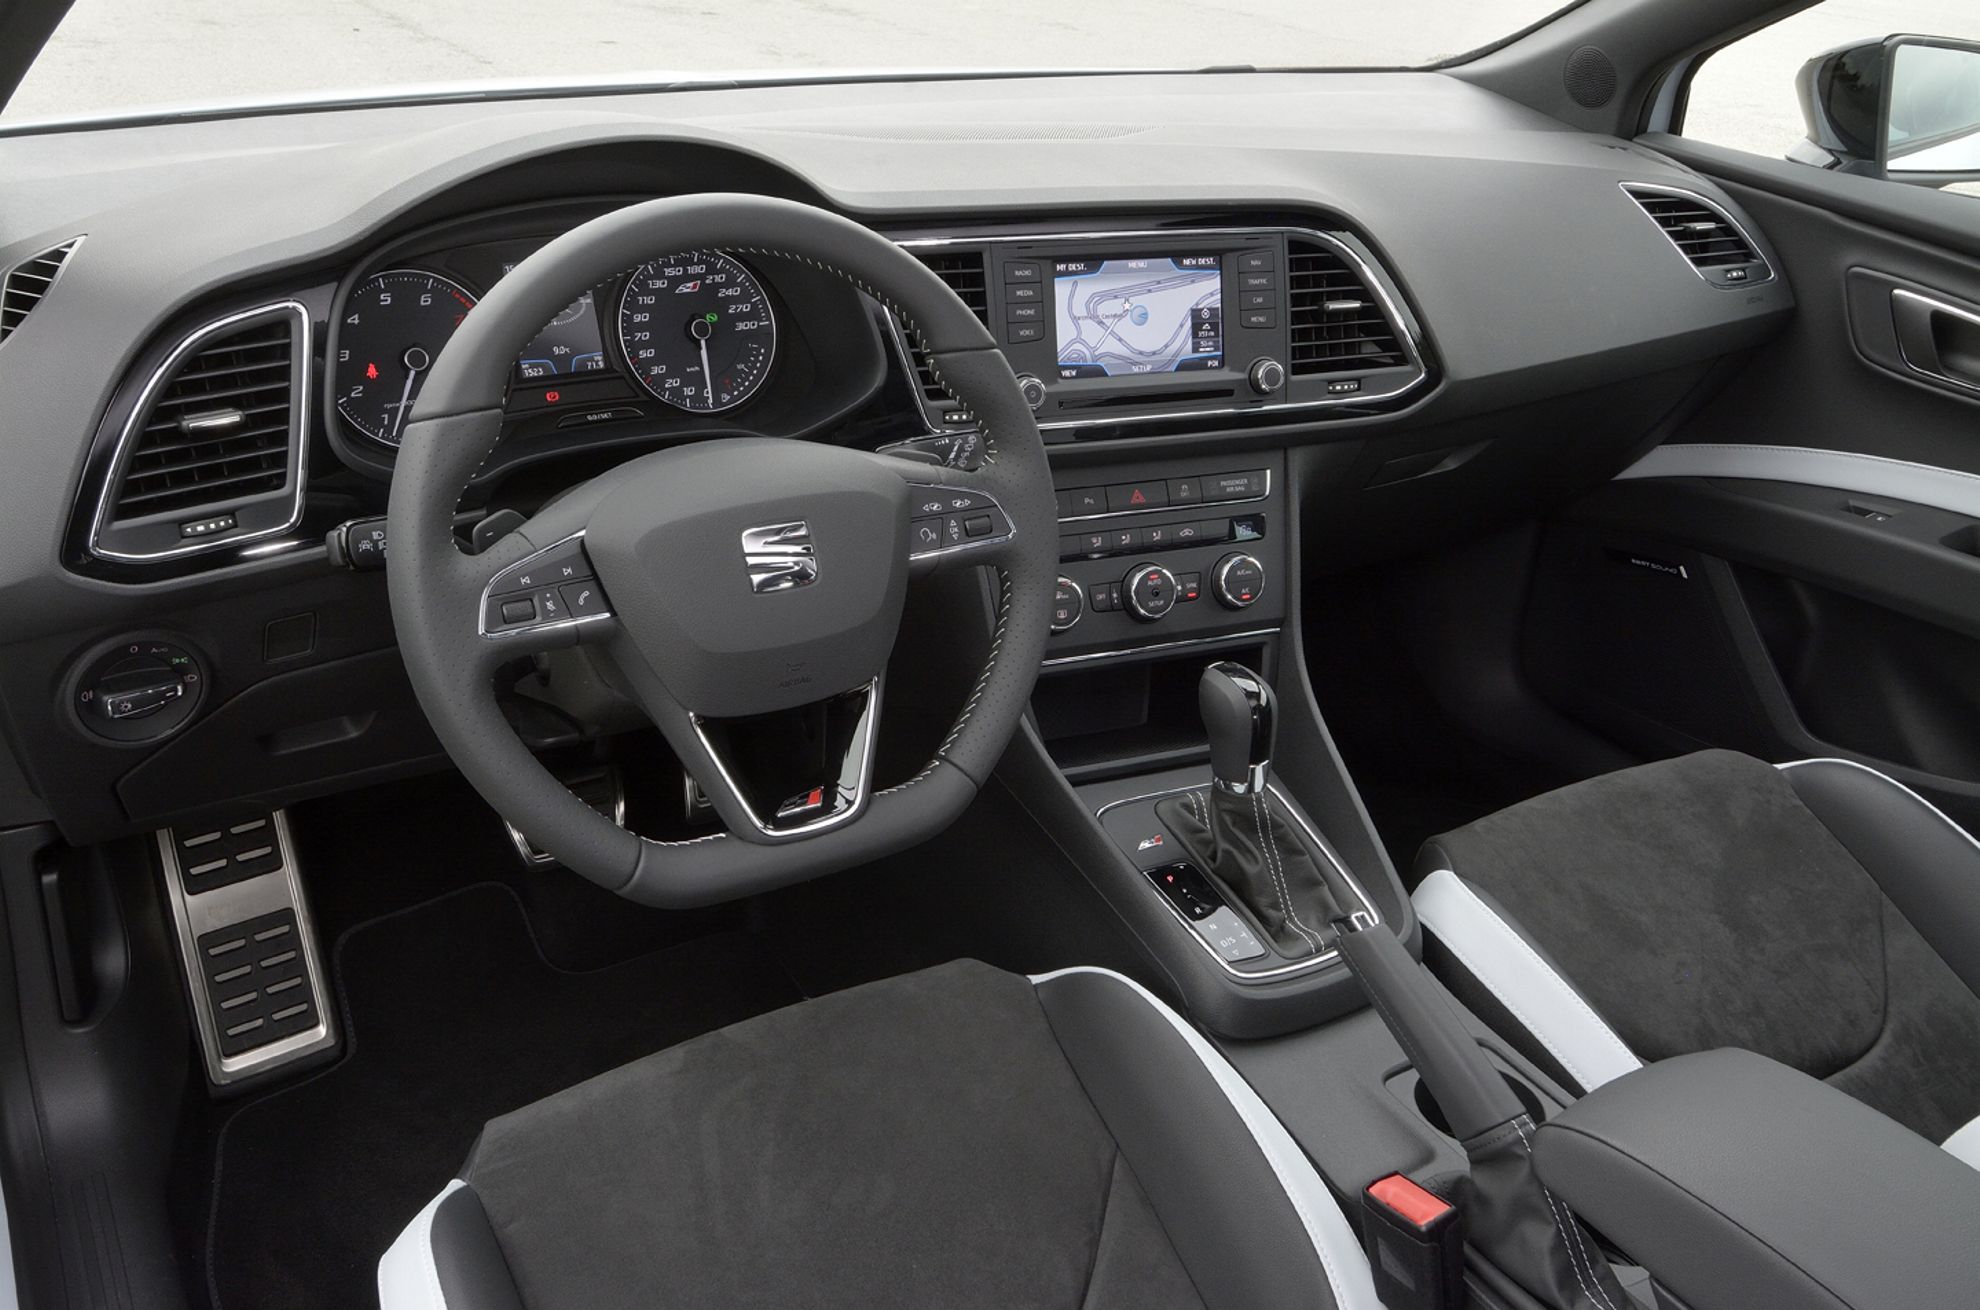 How Much Does a SEAT LEON CUPRA cost in the UK?